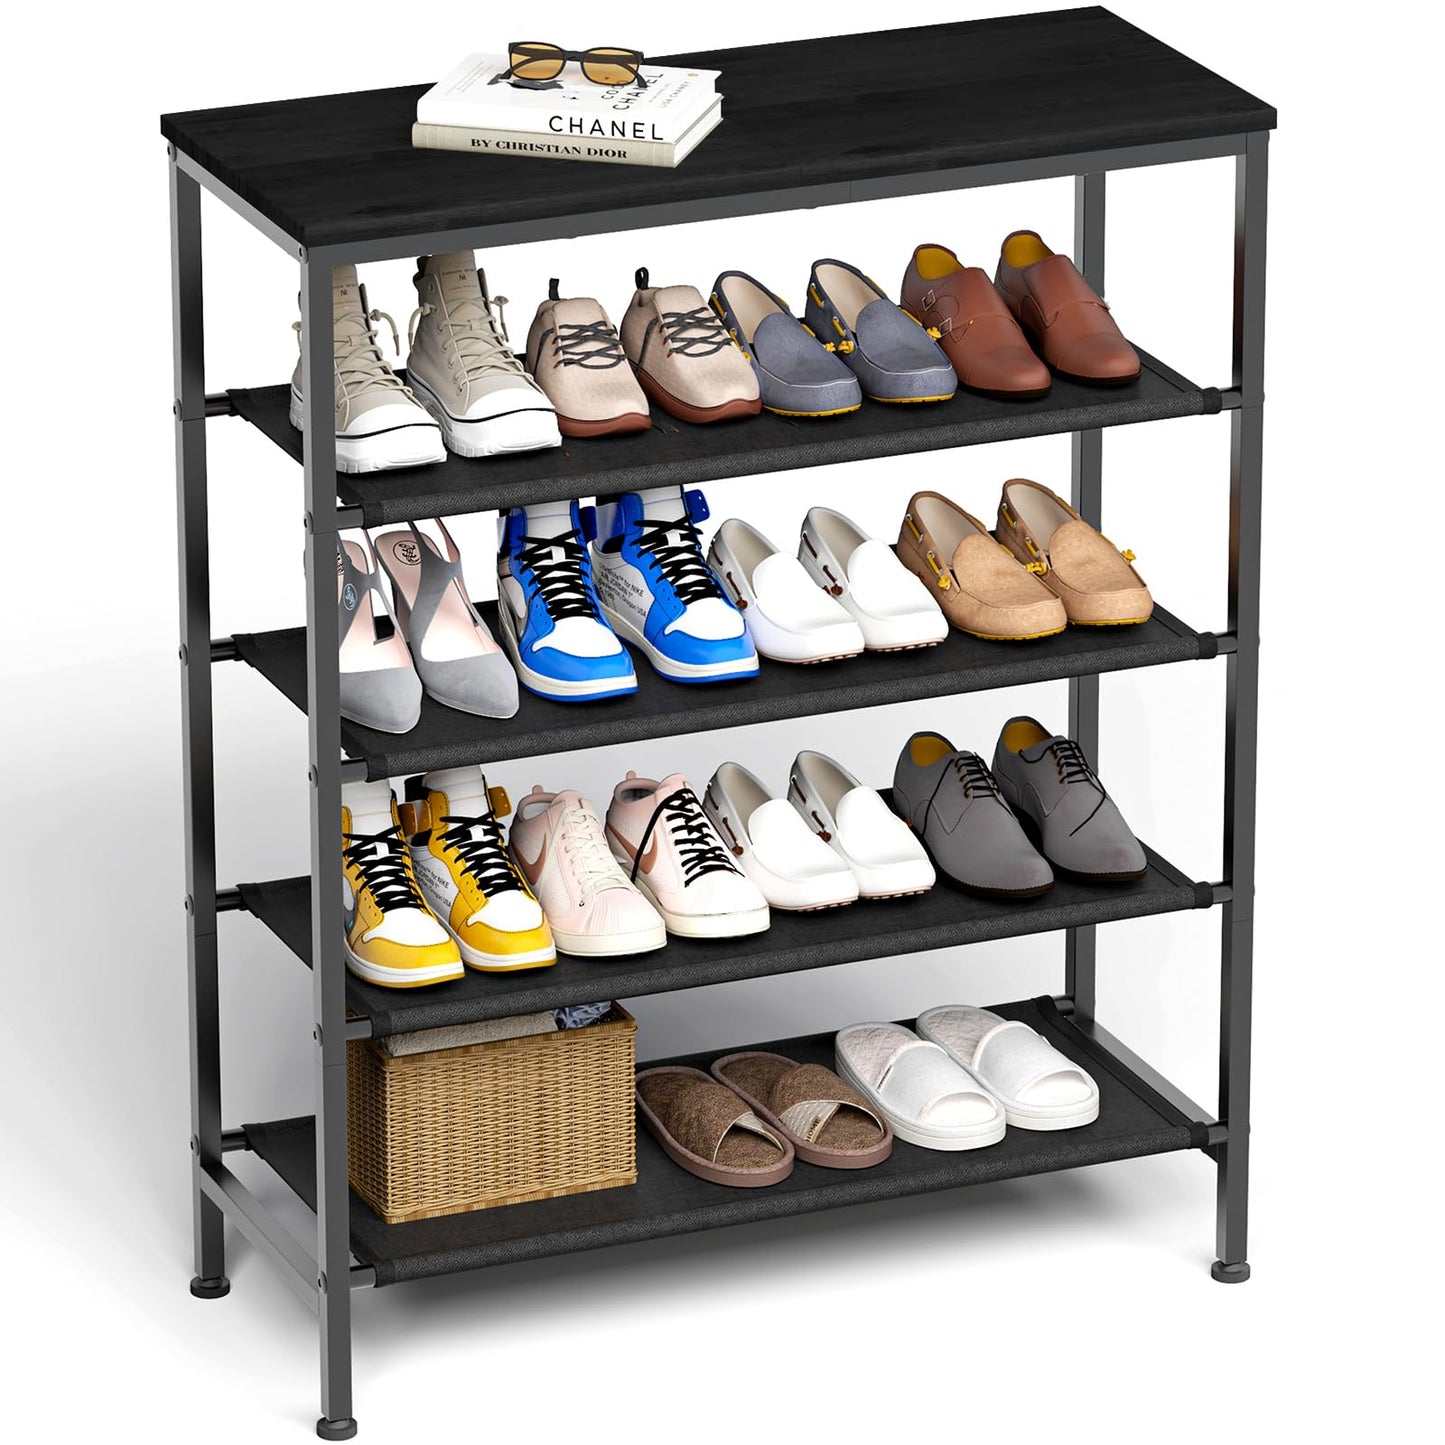 Z&L HOUSE 5 Tier Shoe Rack for Entryway, Sturdy Black Metal Framed Free Standing Shoe Shelf, Uniquely Versatile and Spacious Wood Top Storage, Shoe